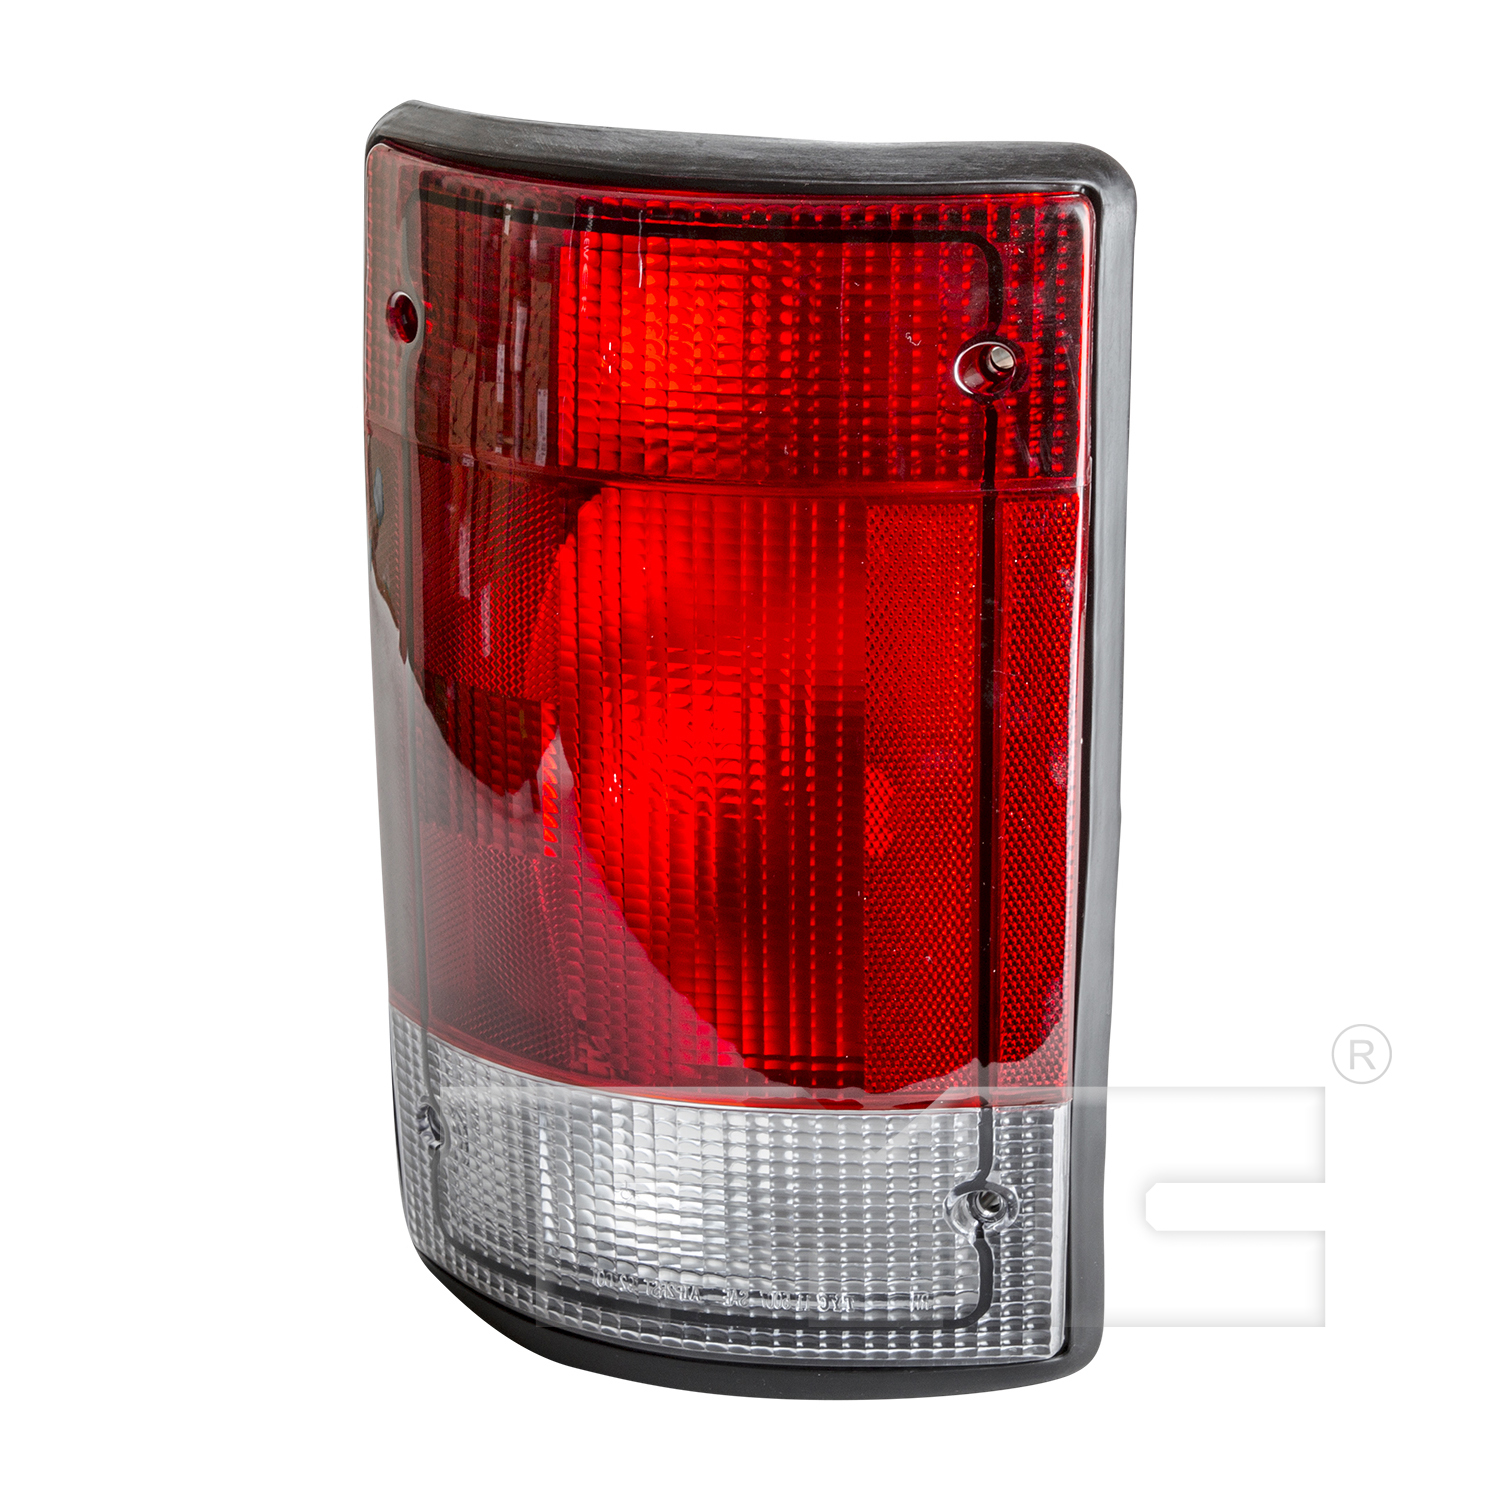 Aftermarket TAILLIGHTS for FORD - E-150 ECONOLINE, E-150 ECONOLINE,95-02,LT Taillamp assy